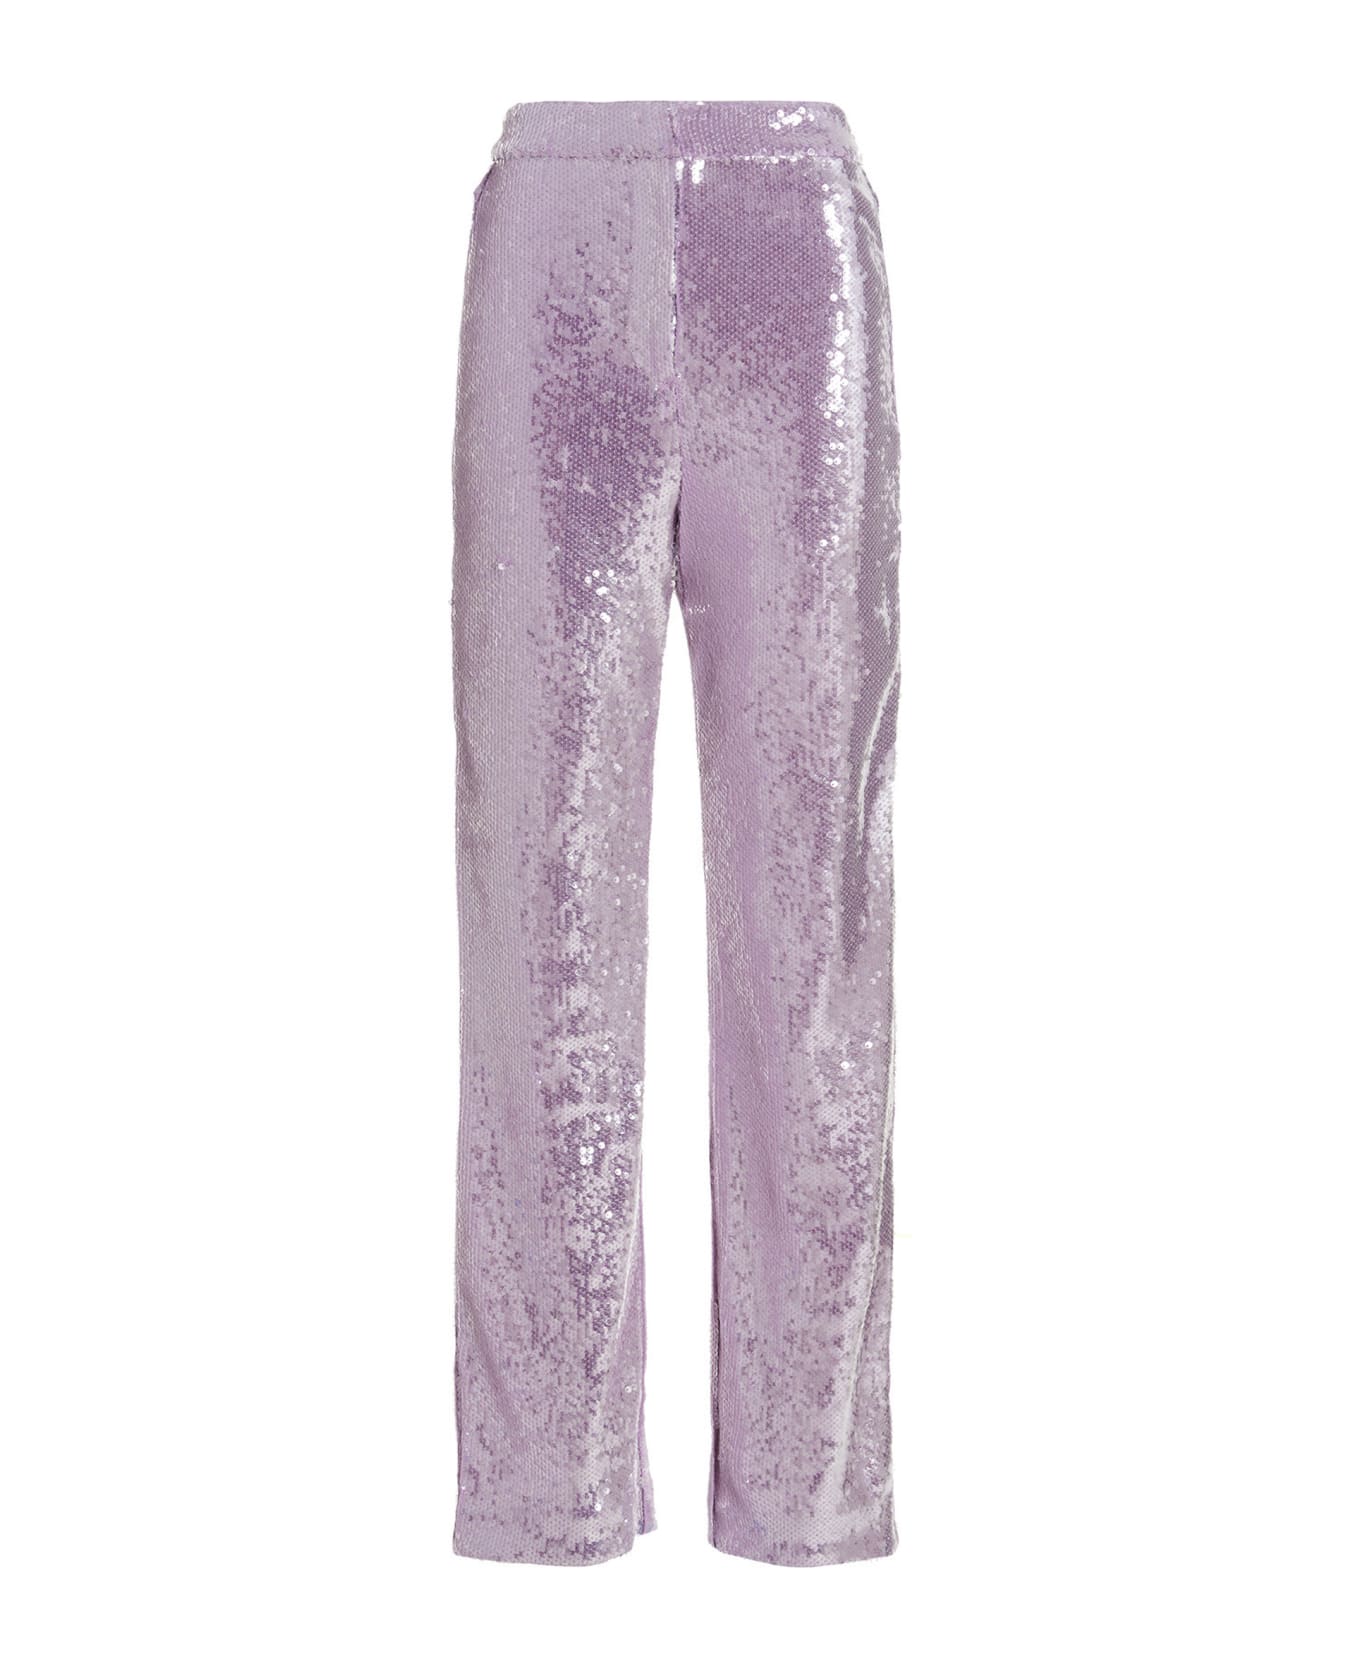 Rotate by Birger Christensen Sequin Pants - Purple ボトムス